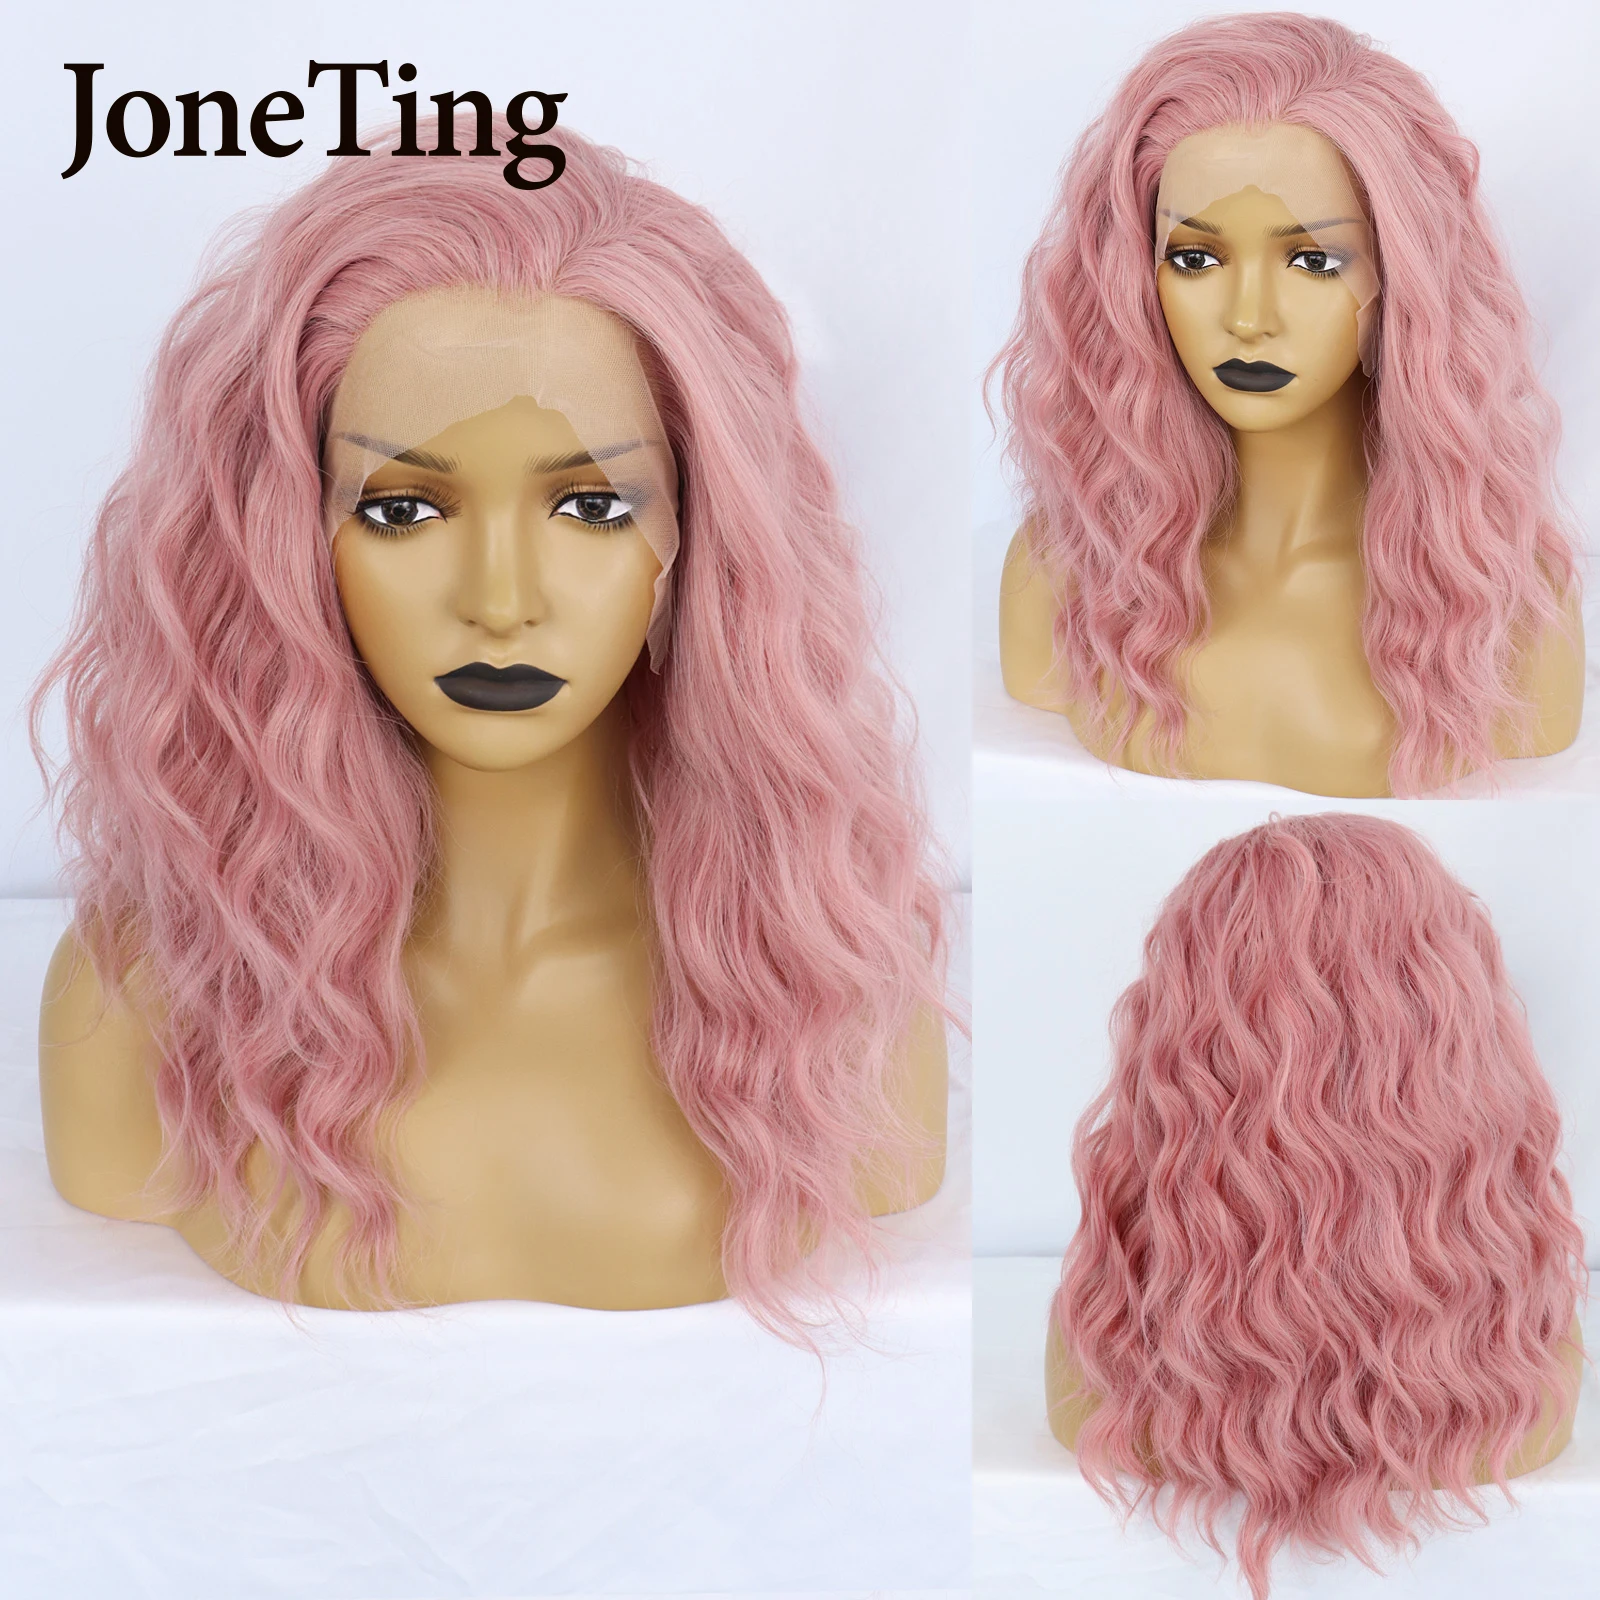 JT Synthetic Short Pink Lace Front Wig Natural Hairline BOb Wave Lace Wigs with Side Part Heat Resistant Fiber Cosplay Wig Women